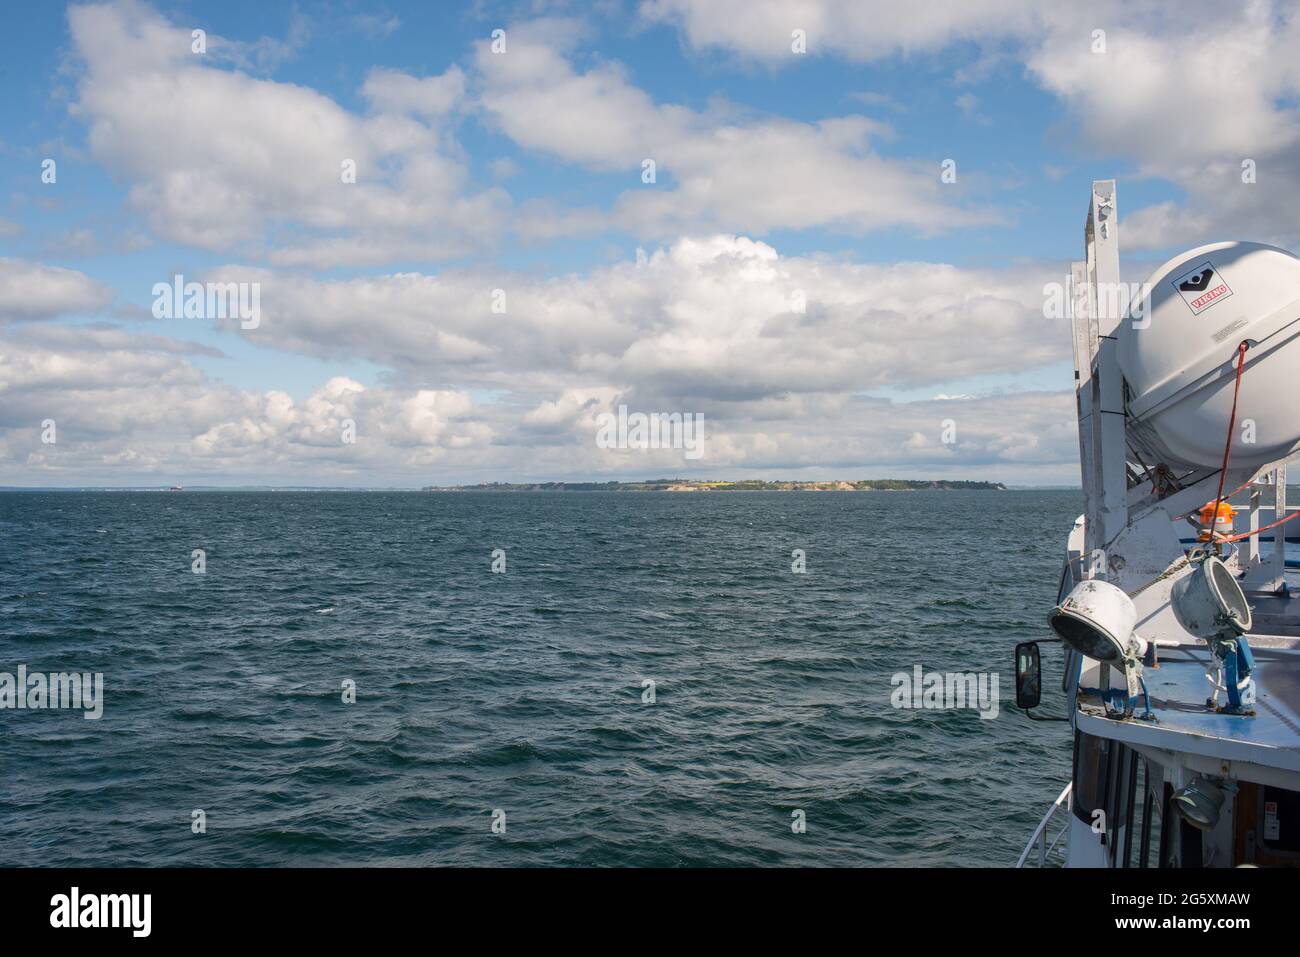 The island Ven in the Øresund between Denmark and Sweden as seen from a ship Stock Photo